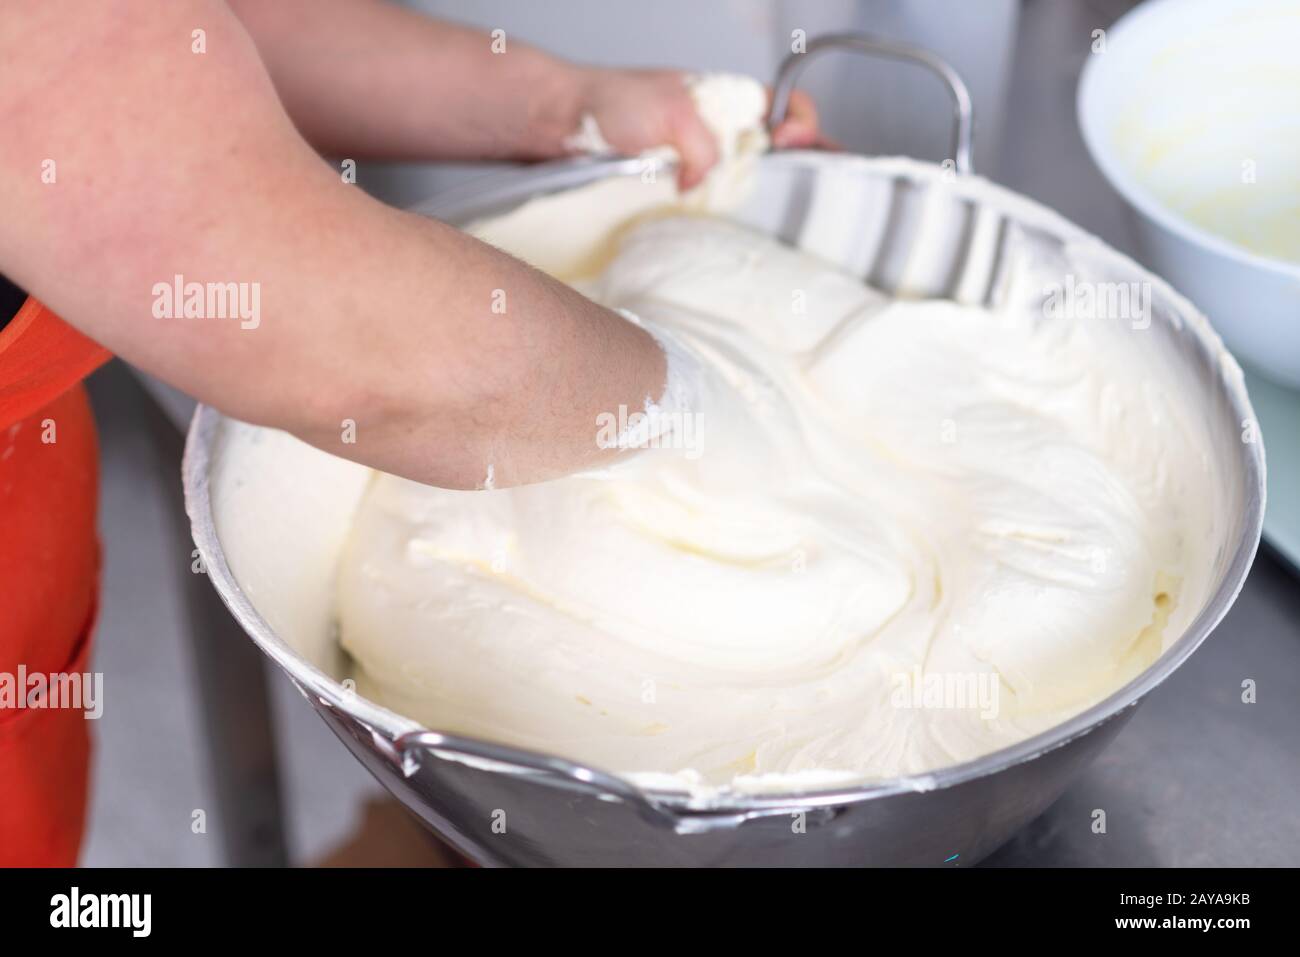 Mixing white egg cream in bowl with hands, baking cake. Stock Photo